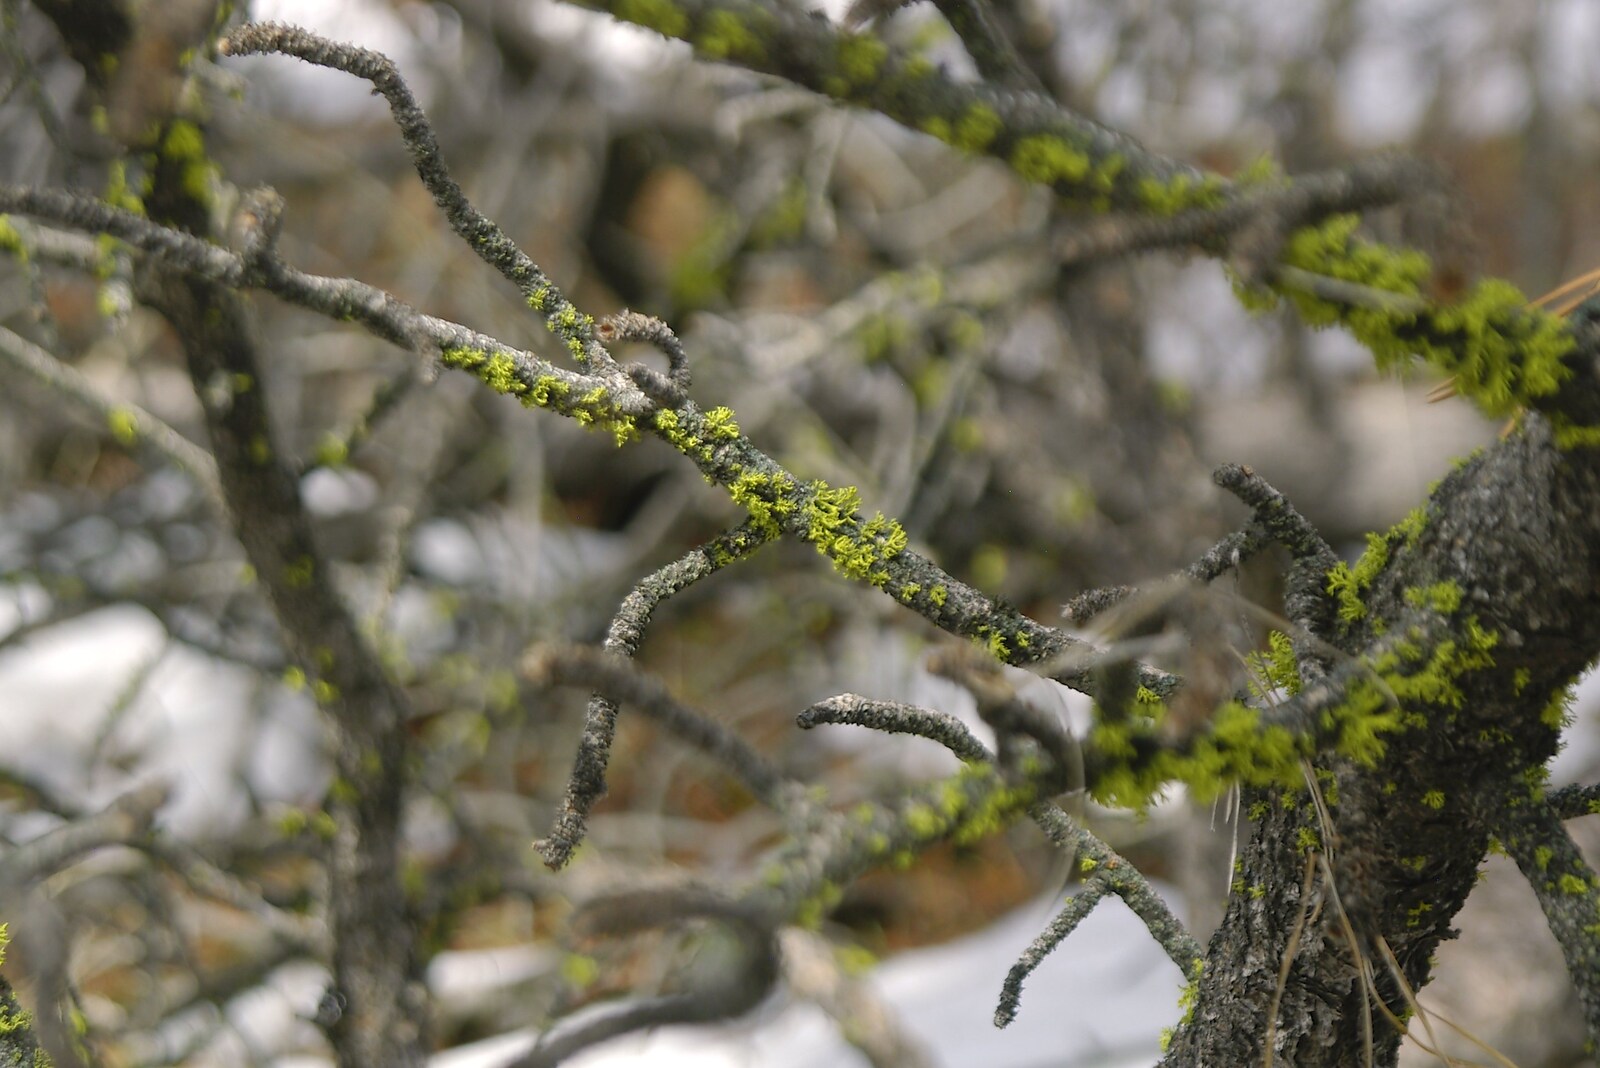 Lichen on a twig from California Snow: San Bernadino State Forest, California, US - 26th March 2006